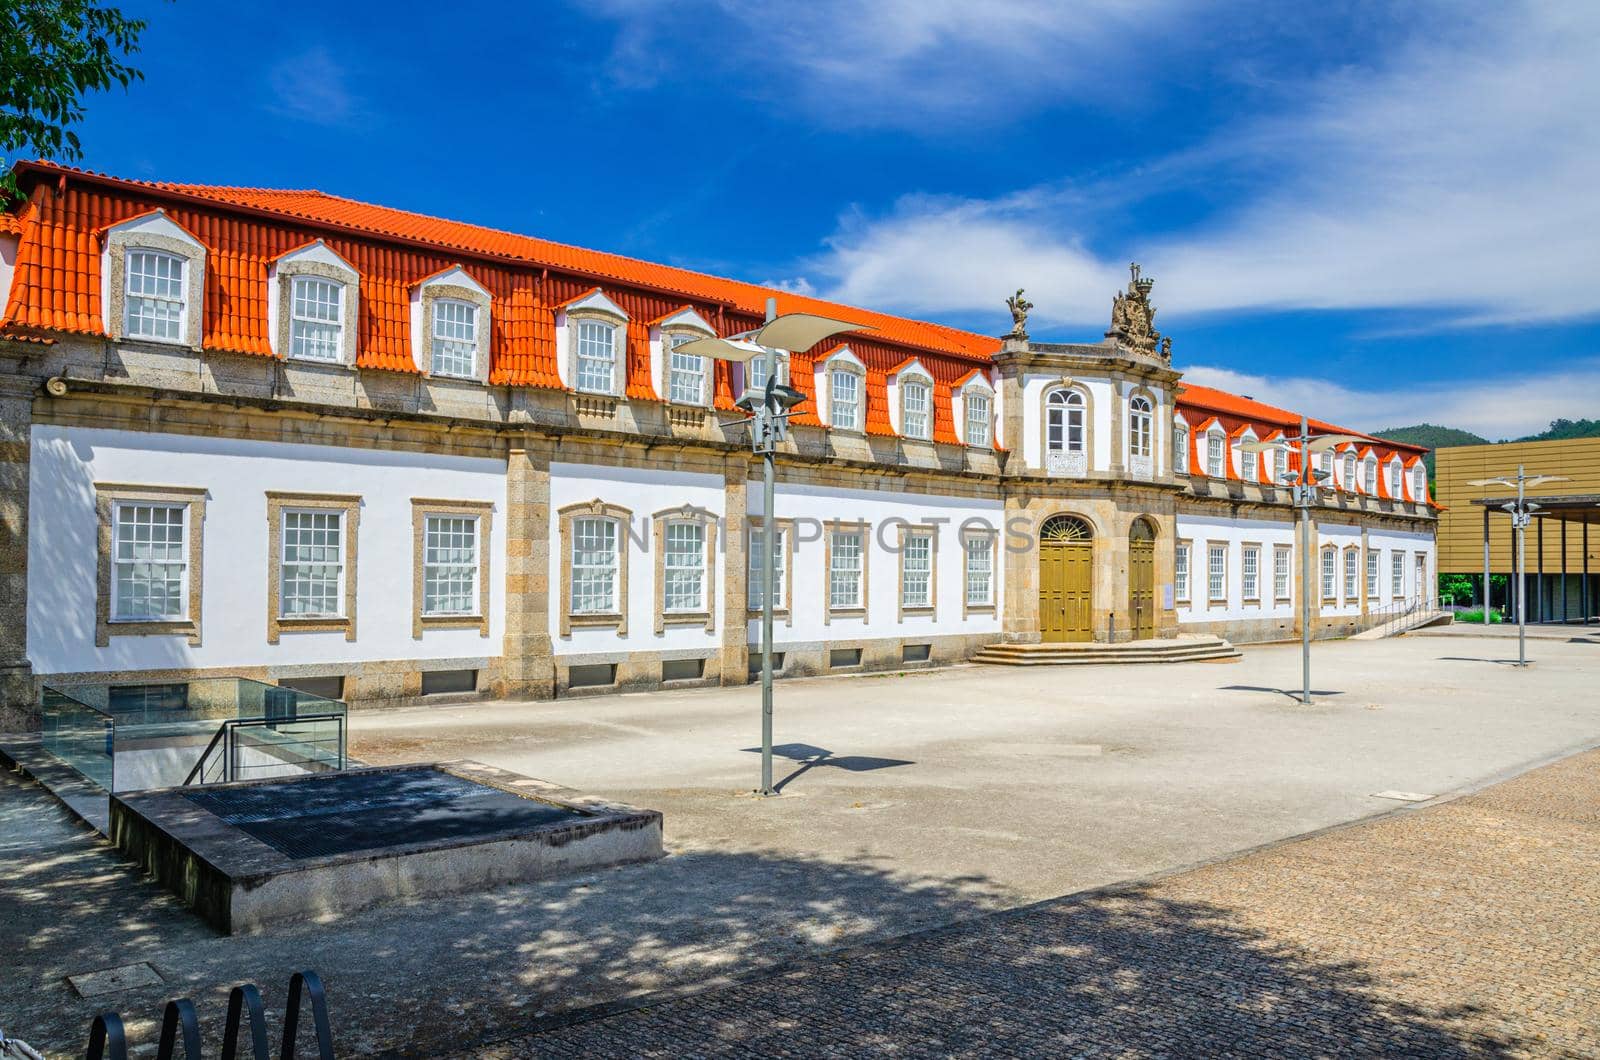 Centro Cultural Vila Flor palace palacio building in Guimaraes city historical centre, blue sky white clouds background, Norte or Northern Portugal